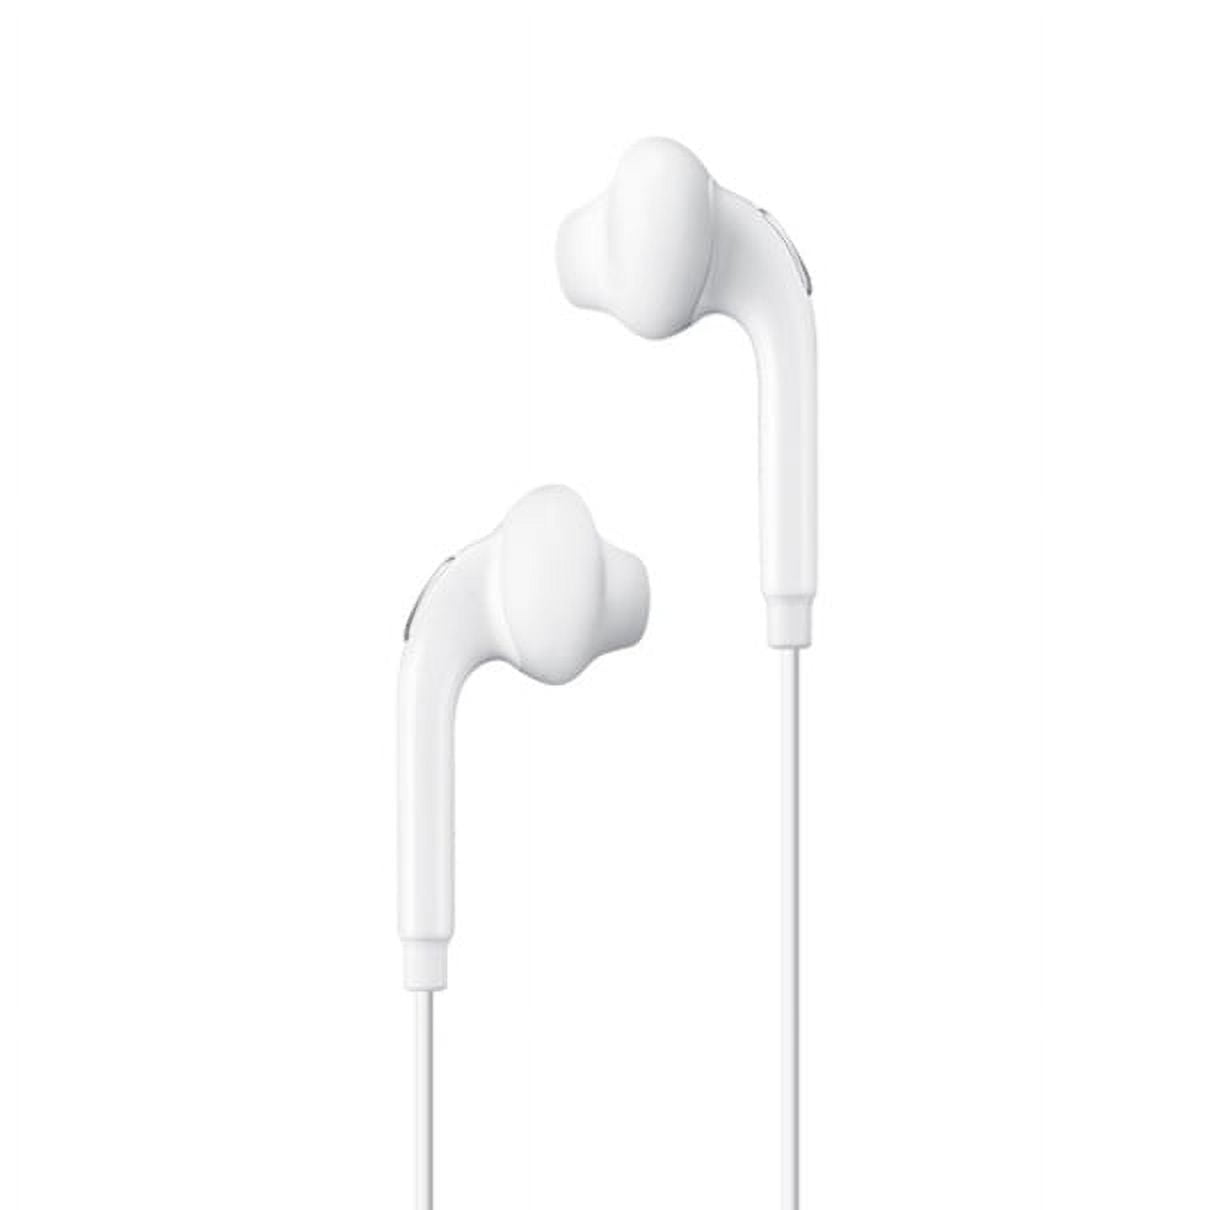 Headset OEM 3.5mm Hands-free Earphones Mic Dual Earbuds Headphones  Earpieces In-Ear Stereo Wired White L9K for ZTE Speed, Supreme, Unico,  Valet, 